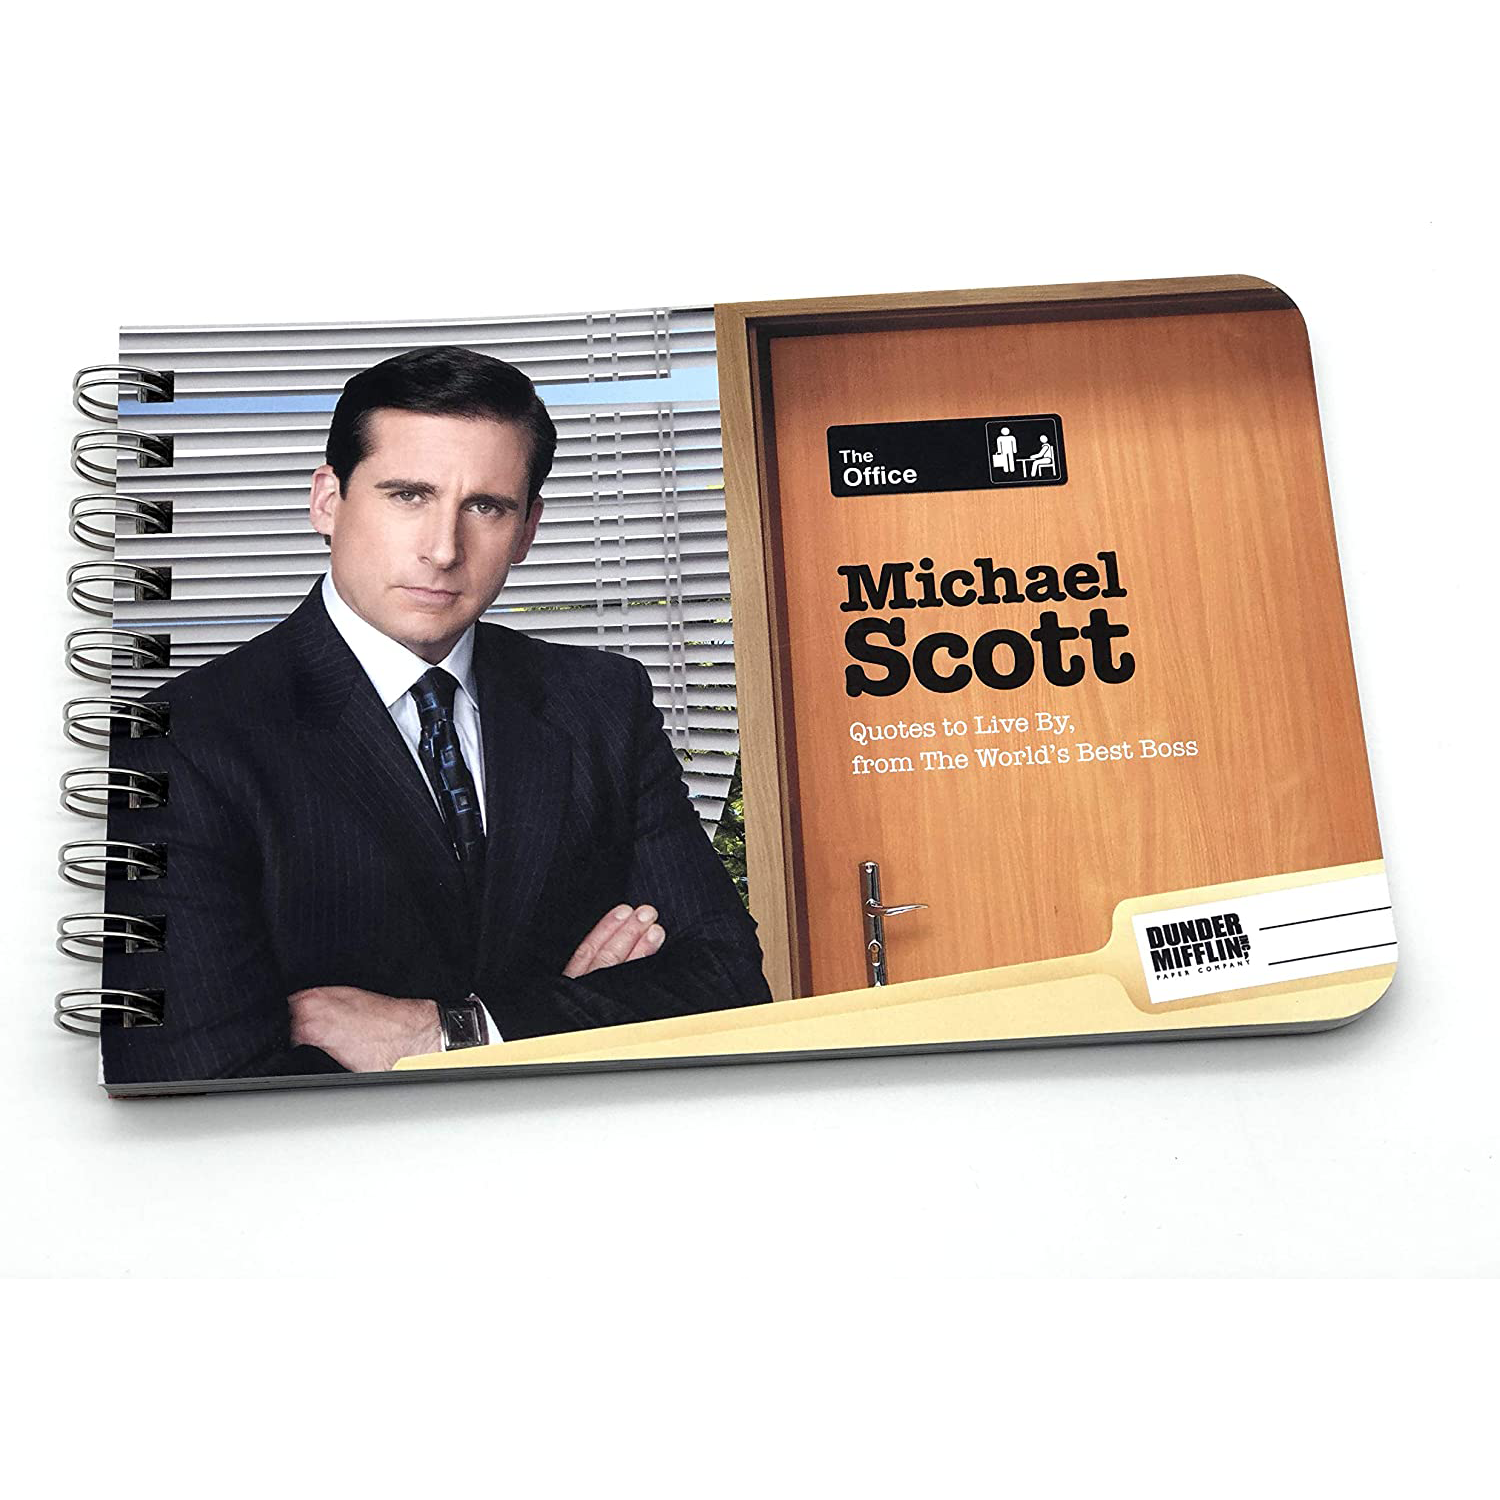 Inside Dunder Mifflin : The Ultimate Fan's Guide to the Office by